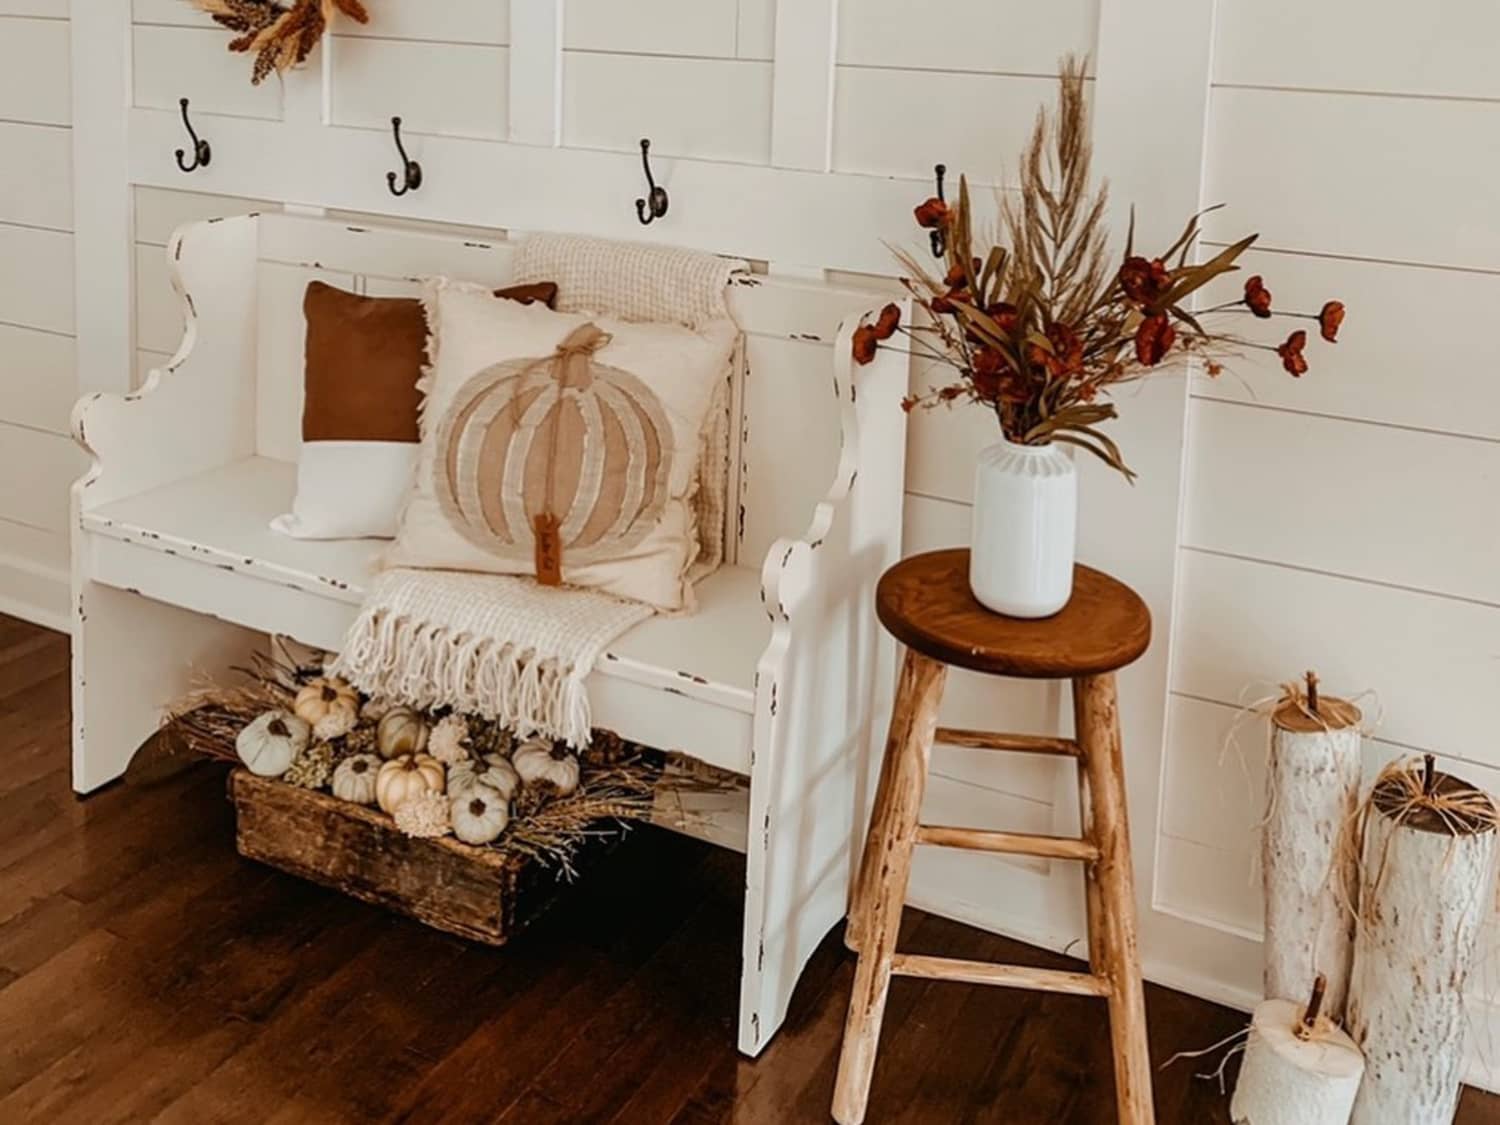 20 Fun Fall Decorating Ideas   How to Add an Autumn Decor Vibe to ...